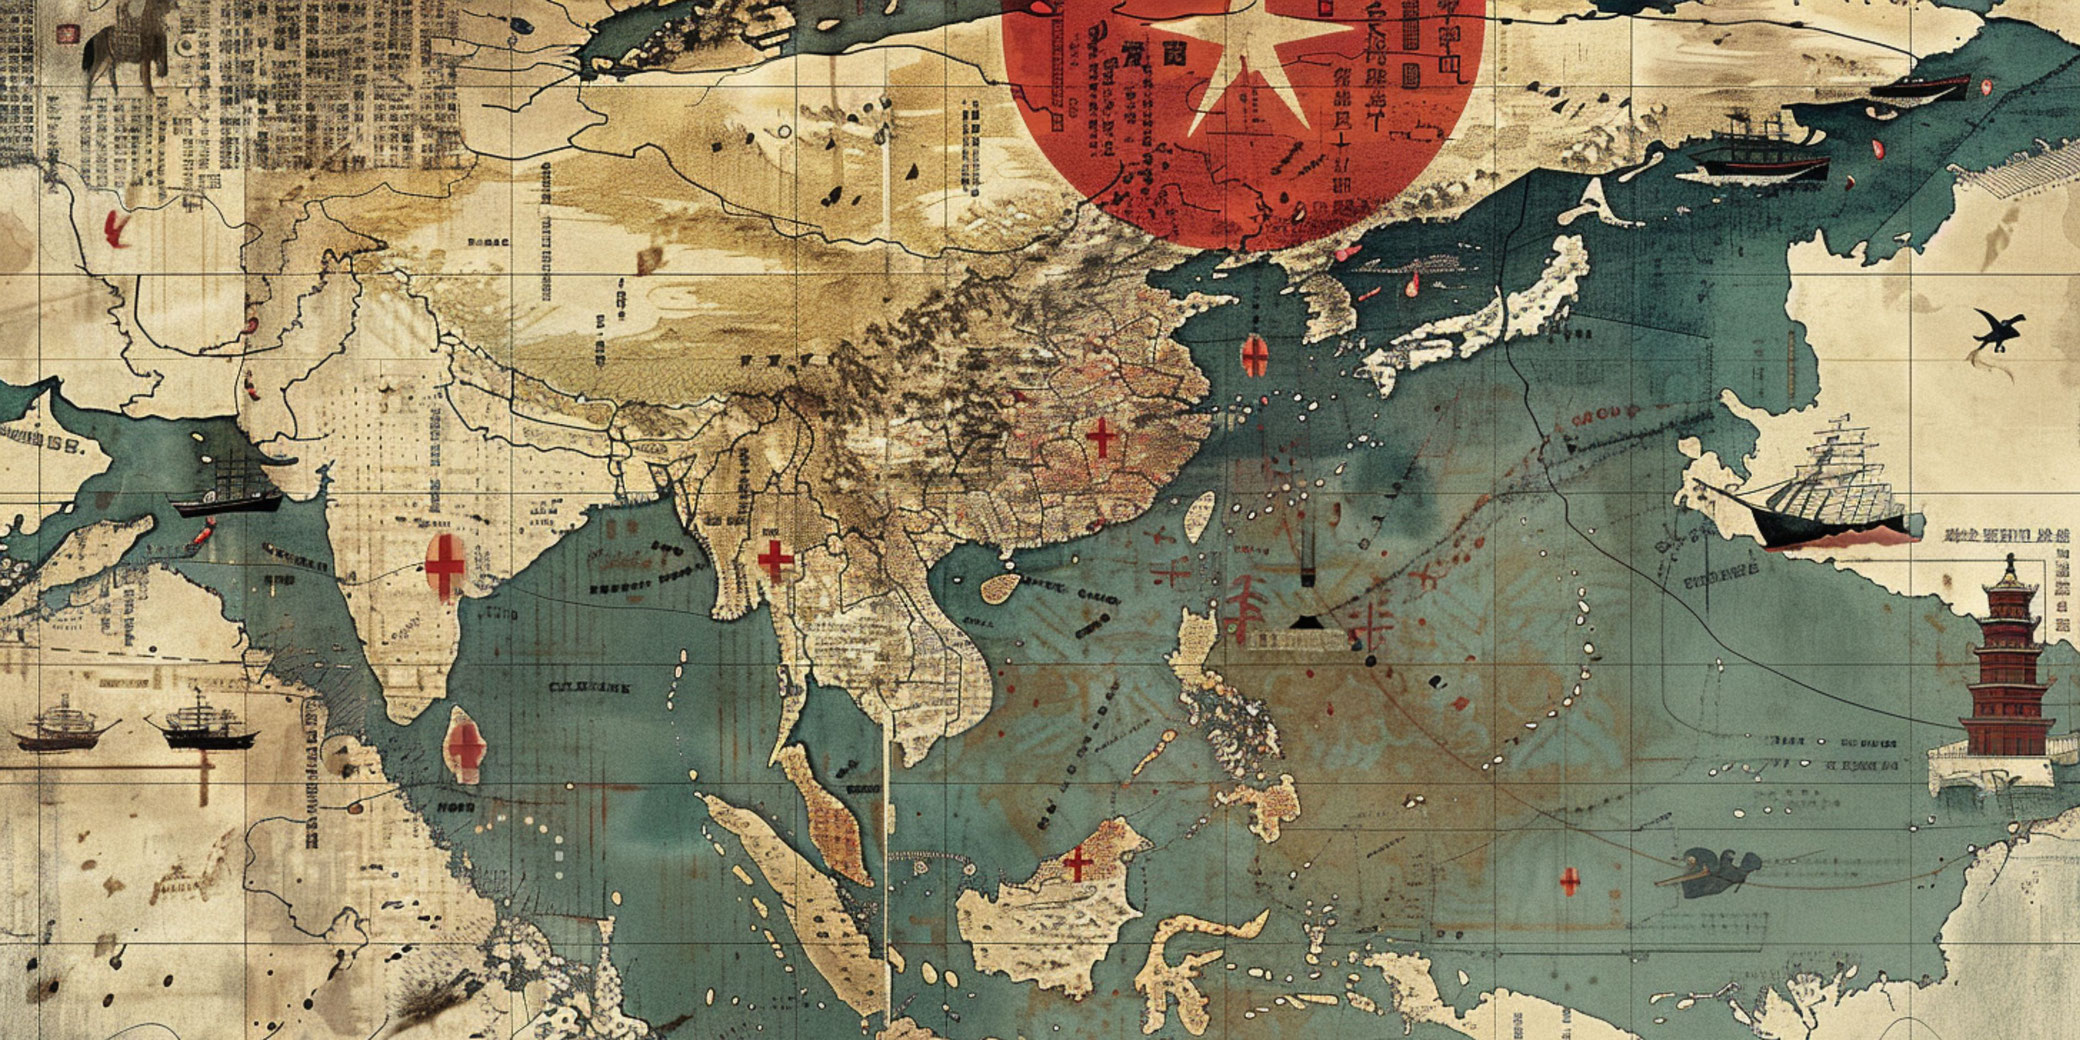 Imperial Japan's ambitious concept of a 'Greater East Asia Co-Prosperity Sphere'